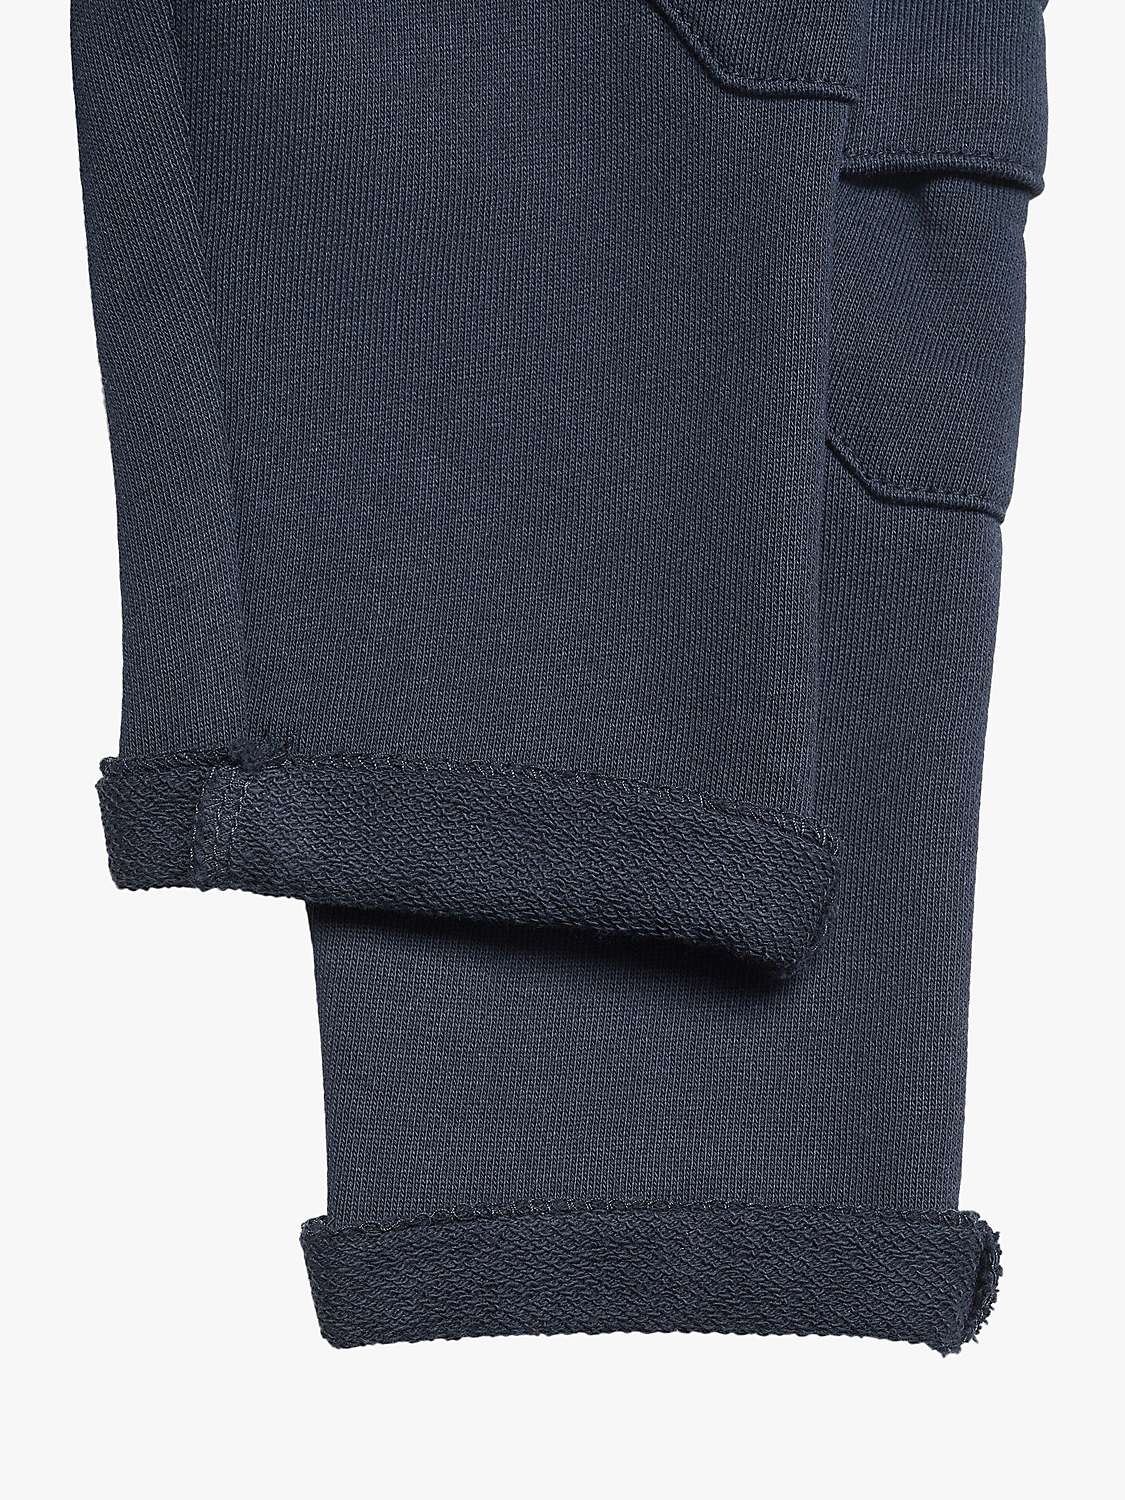 Buy Mango Baby Lito Jogger Style Trousers, Navy Online at johnlewis.com